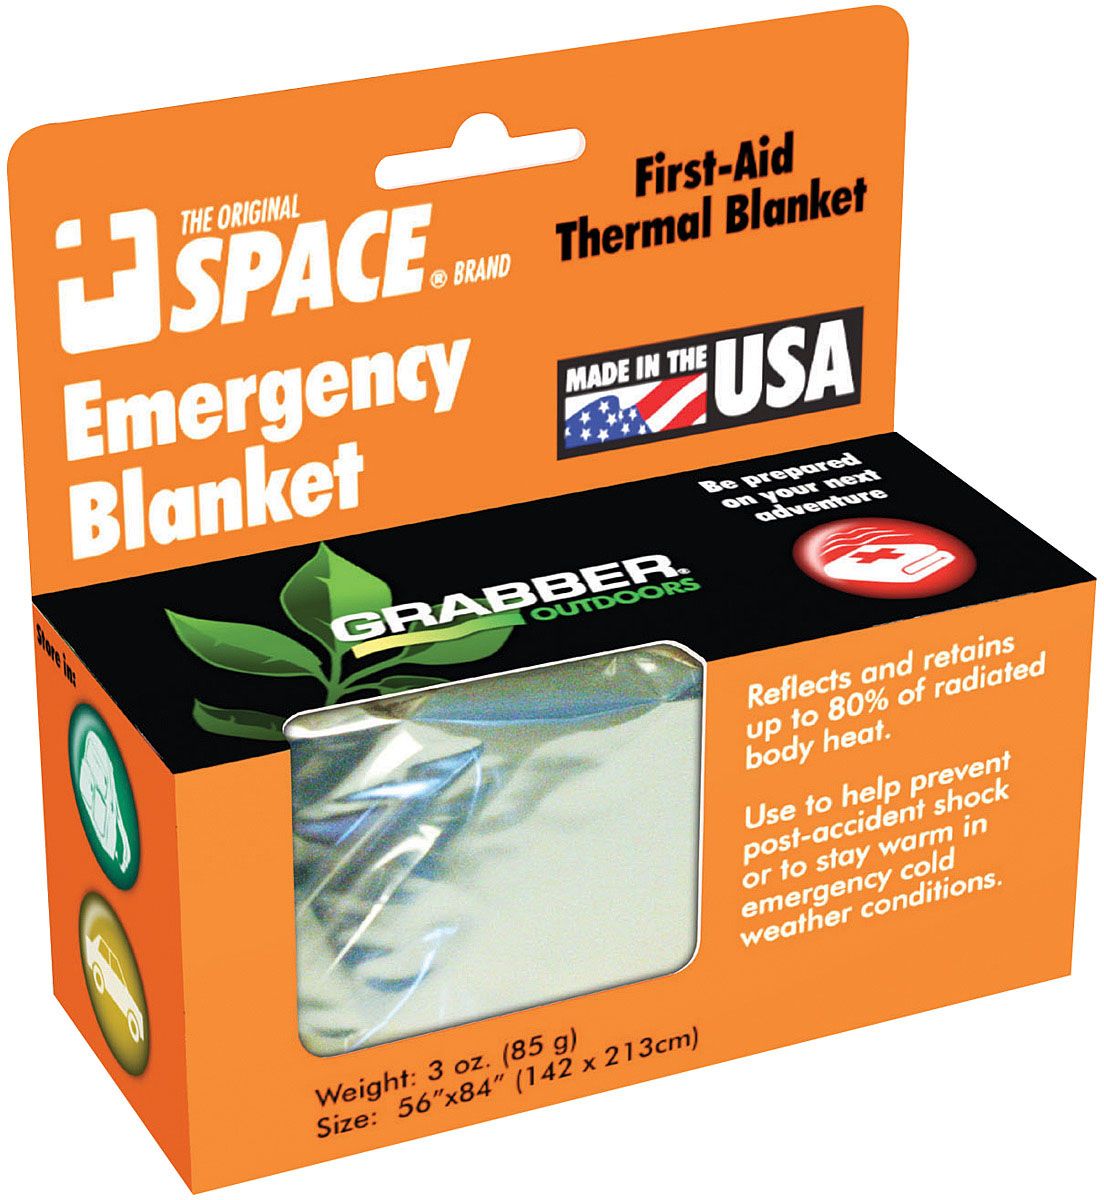 Grabber SPACE Brand |  Emergency First Aid Thermal Survival Blanket - Silver, Emergency, Grabber Space Brand, Defiance Outdoor Gear Co.